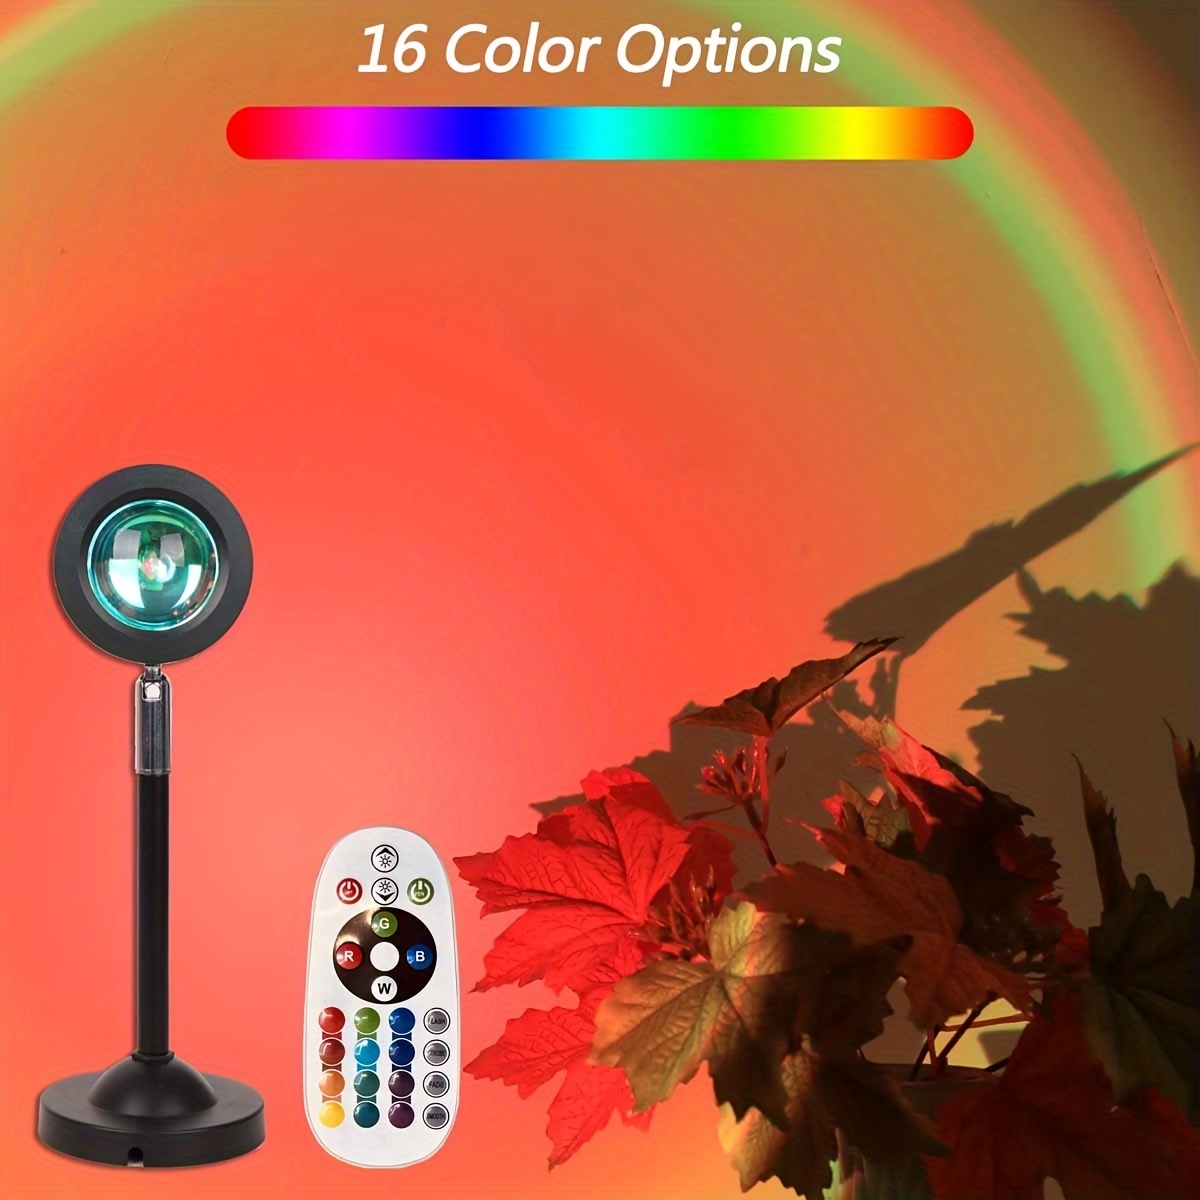 

1pc 16 Colors Sunset Projection Light, Usb Remote Control Color Changing Led Light, Home Bedroom Atmosphere Decorative Light, Photography Background Wall